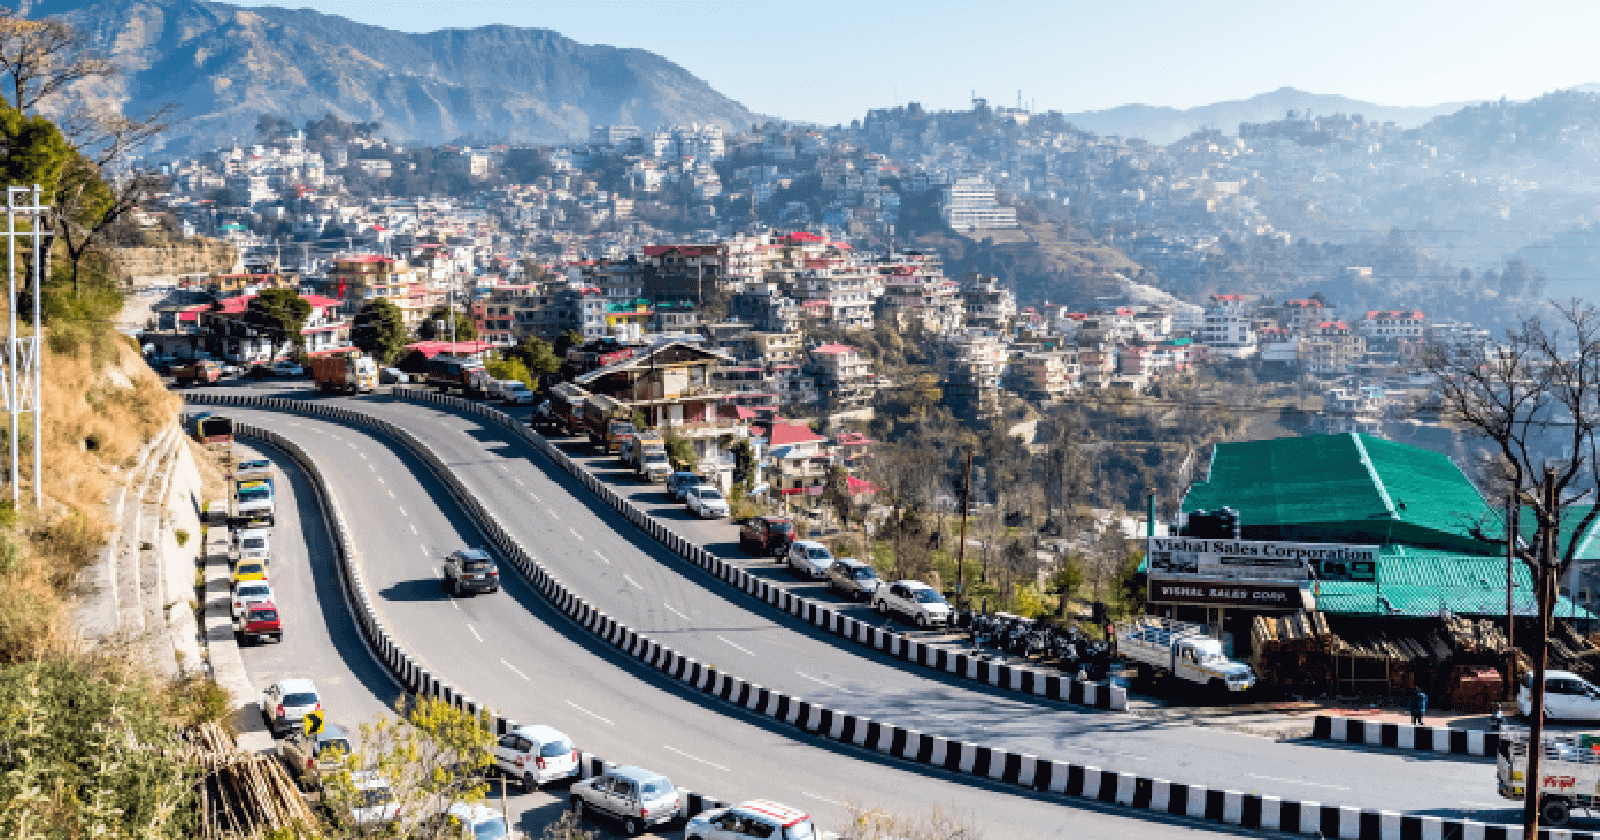 Himachal Pradesh Road Tax Rates for Bike, Car & Commercial Vehicles